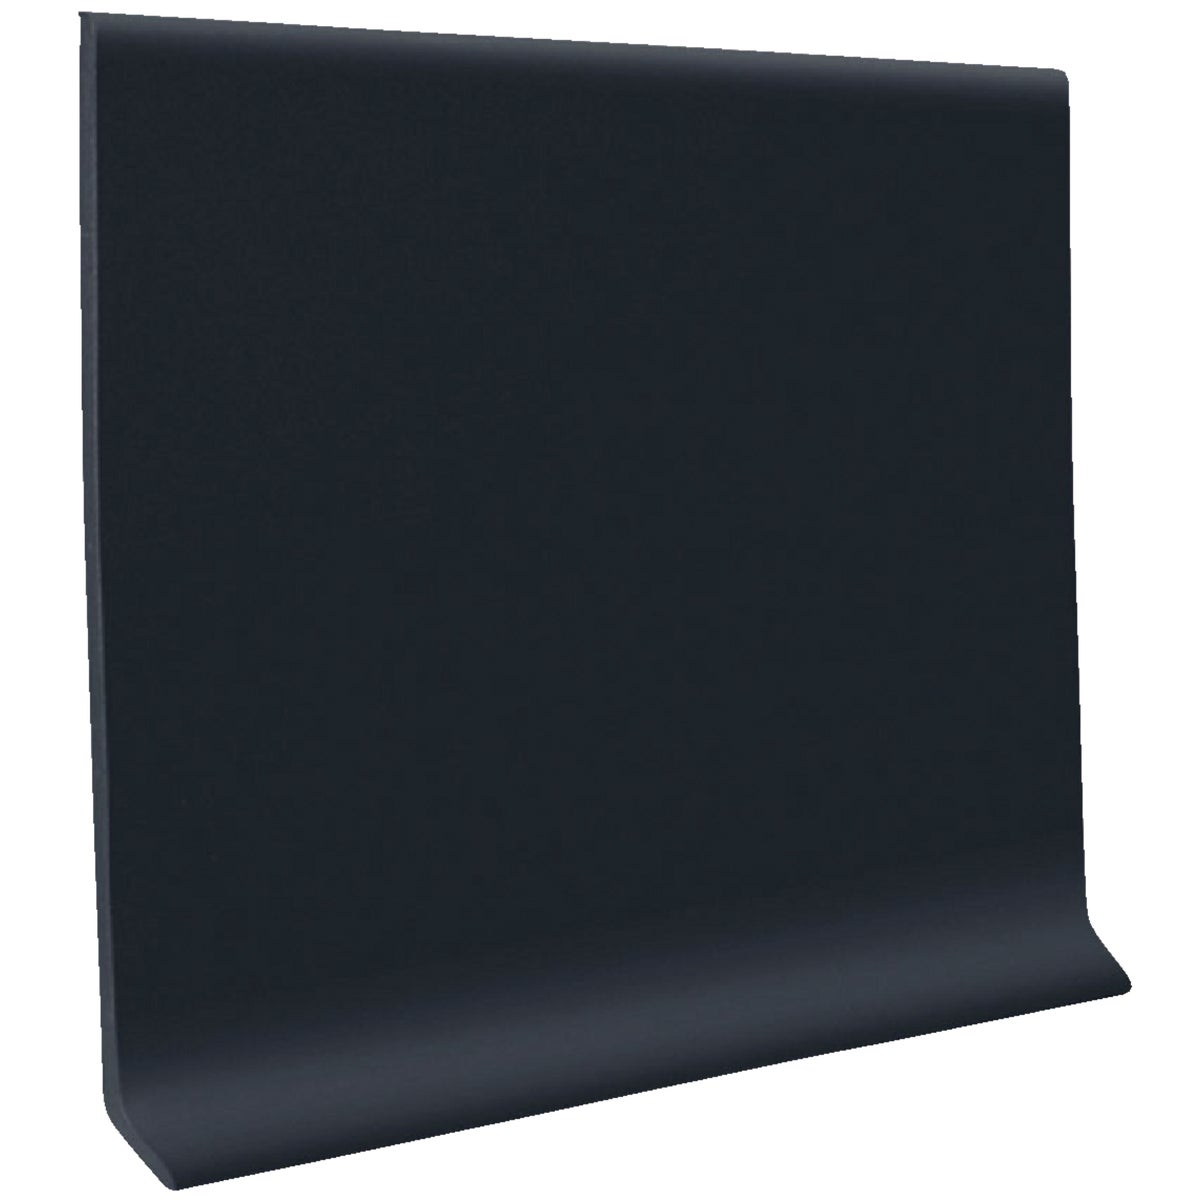 Roppe 4 In. x 4 Ft. Black Vinyl Dryback Wall Cove Base